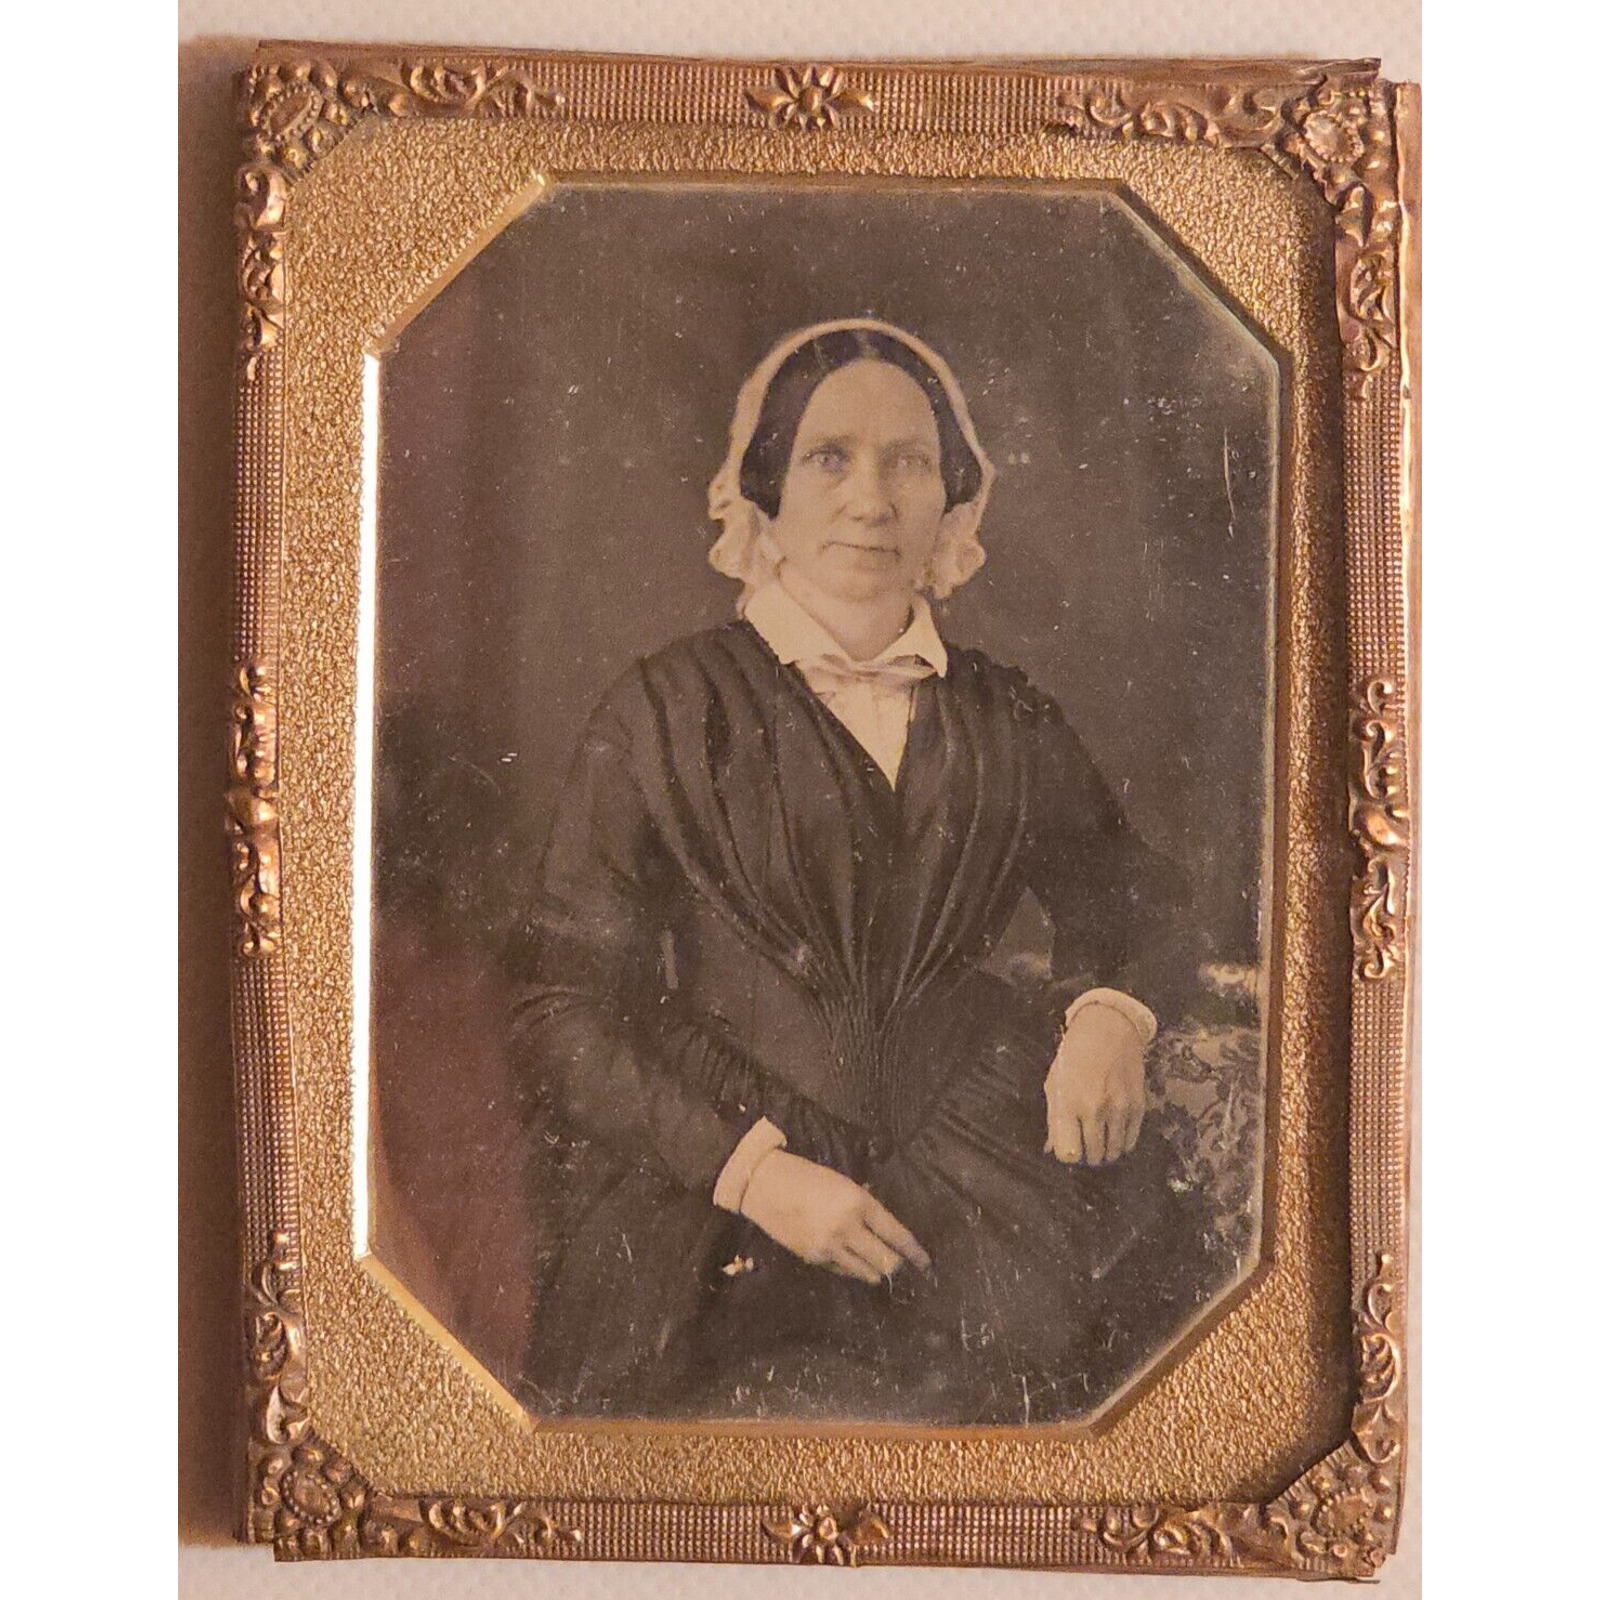 1/4th Plate Daguerreotype Of A Woman With A Bonnet